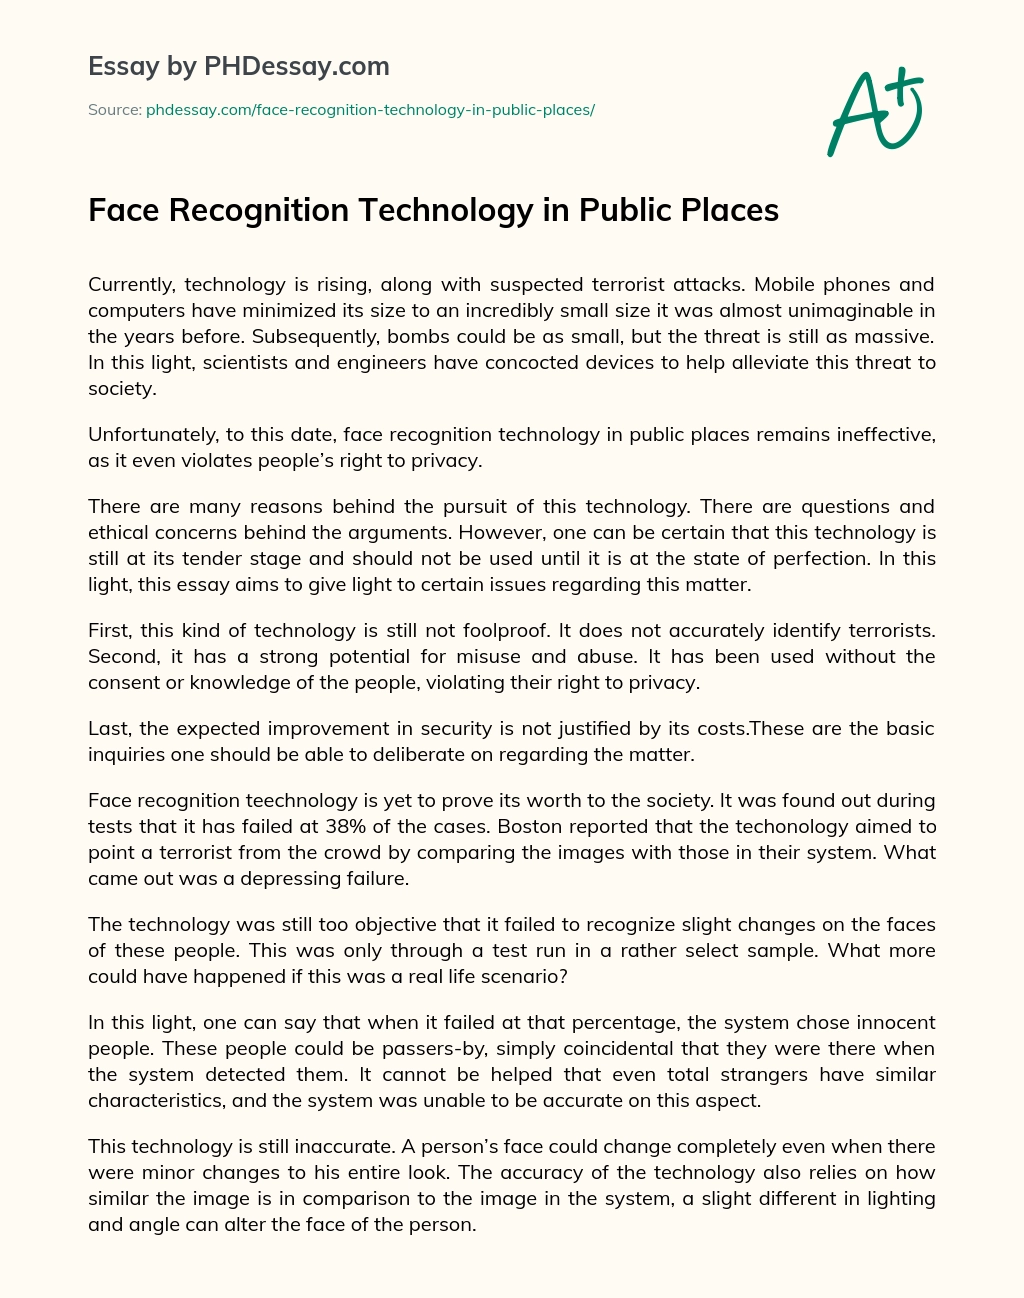 Face Recognition Technology in Public Places essay